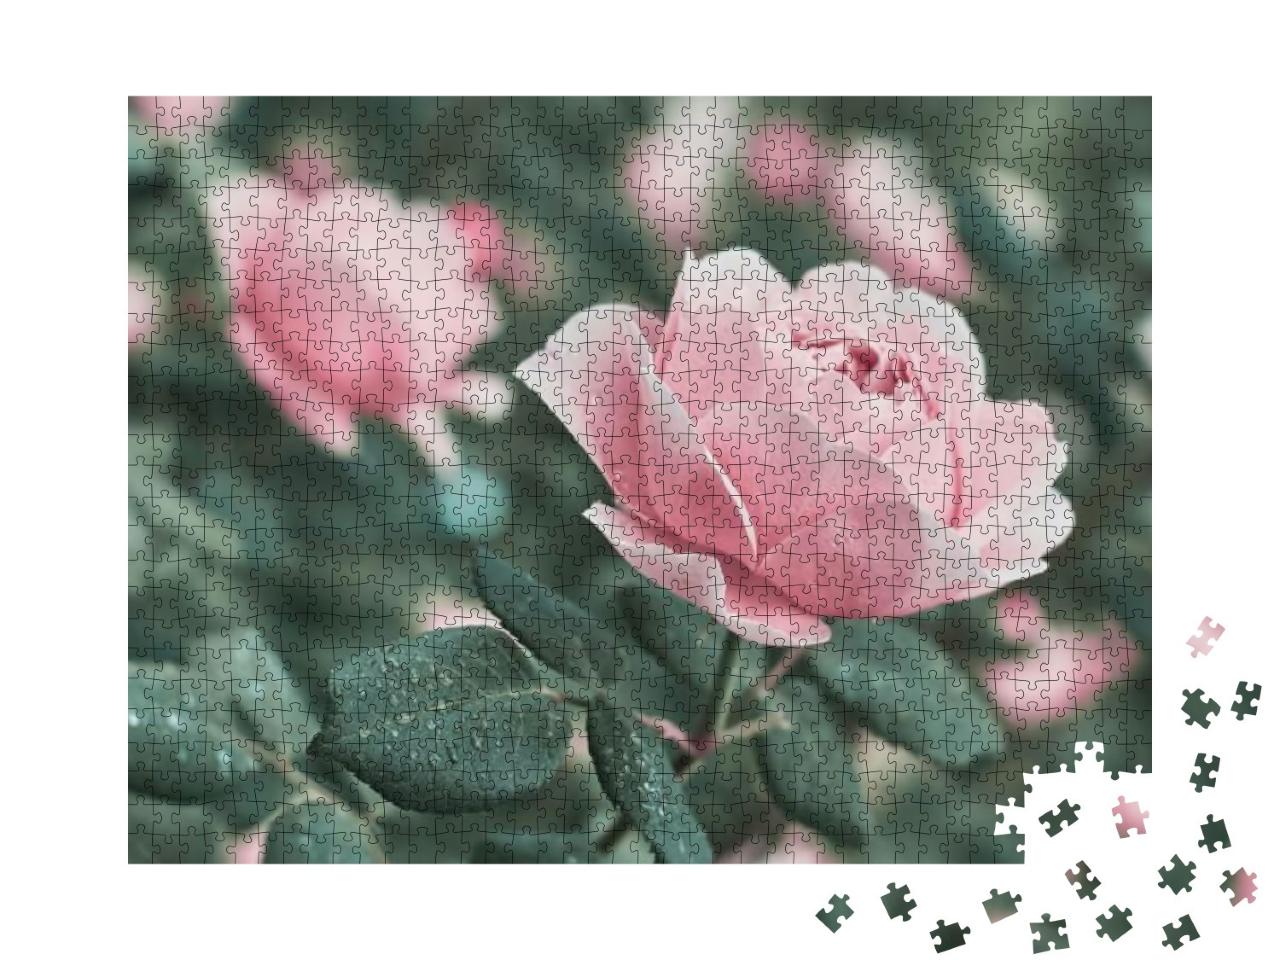 Rose Flower on Background Blurry Pink Roses Flower in the... Jigsaw Puzzle with 1000 pieces